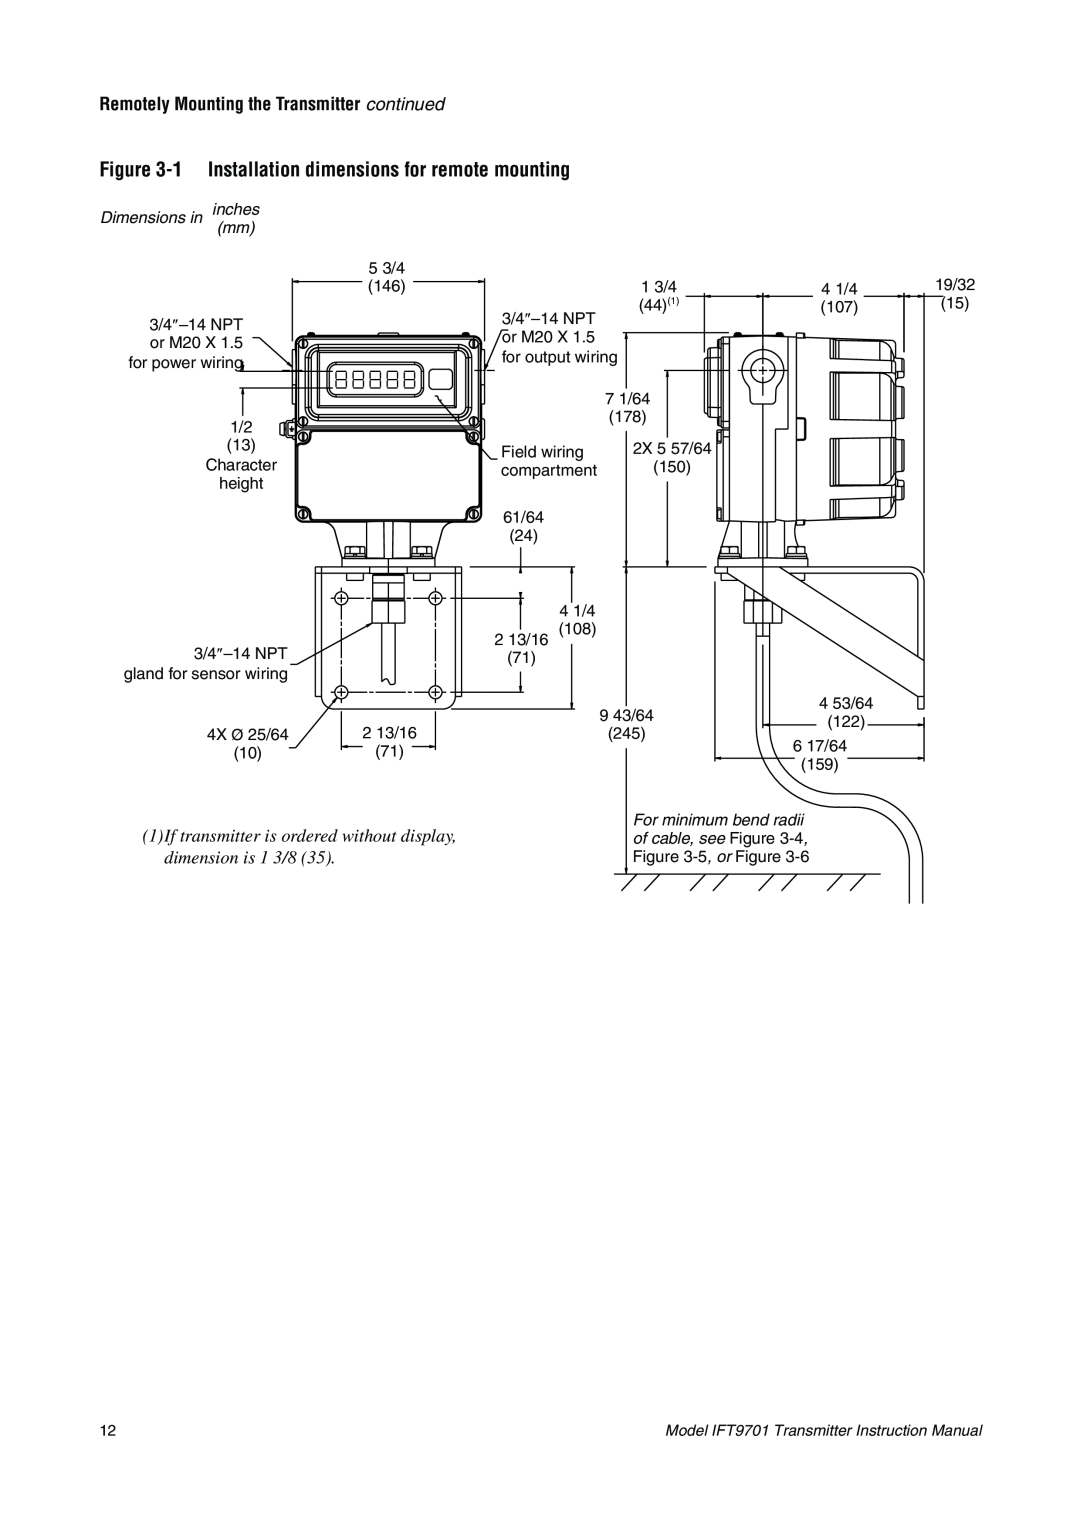 Emerson IFT9701 instruction manual Remotely Mounting the Transmitter continued 